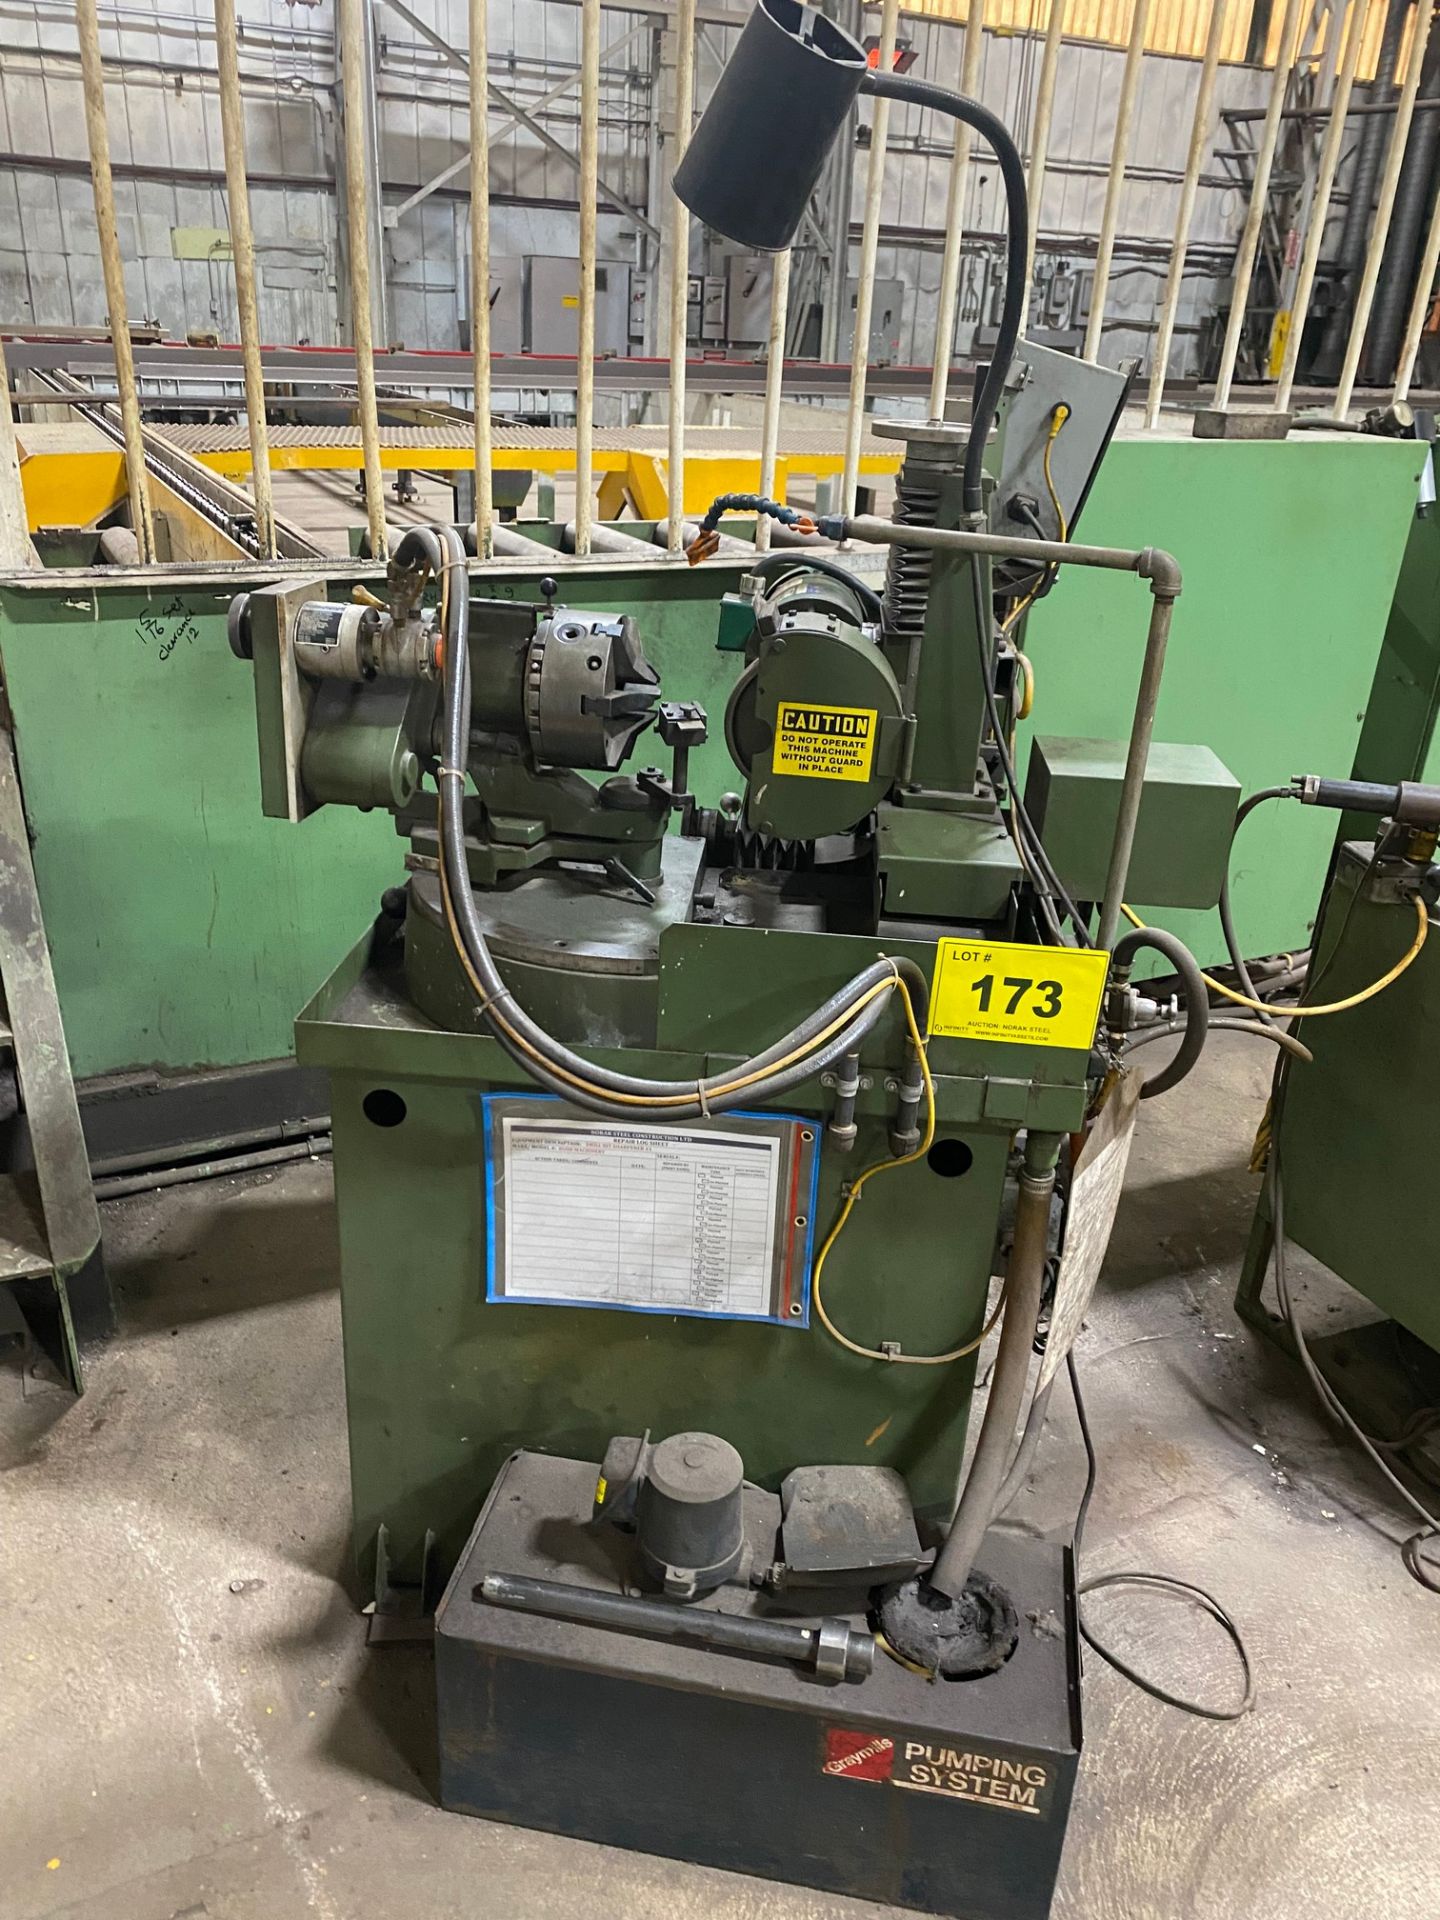 RUSH MACHINERY TOOL CUTTER GRINDER, MODEL 250A, S/N 2952 (RIGGING FEE $150)